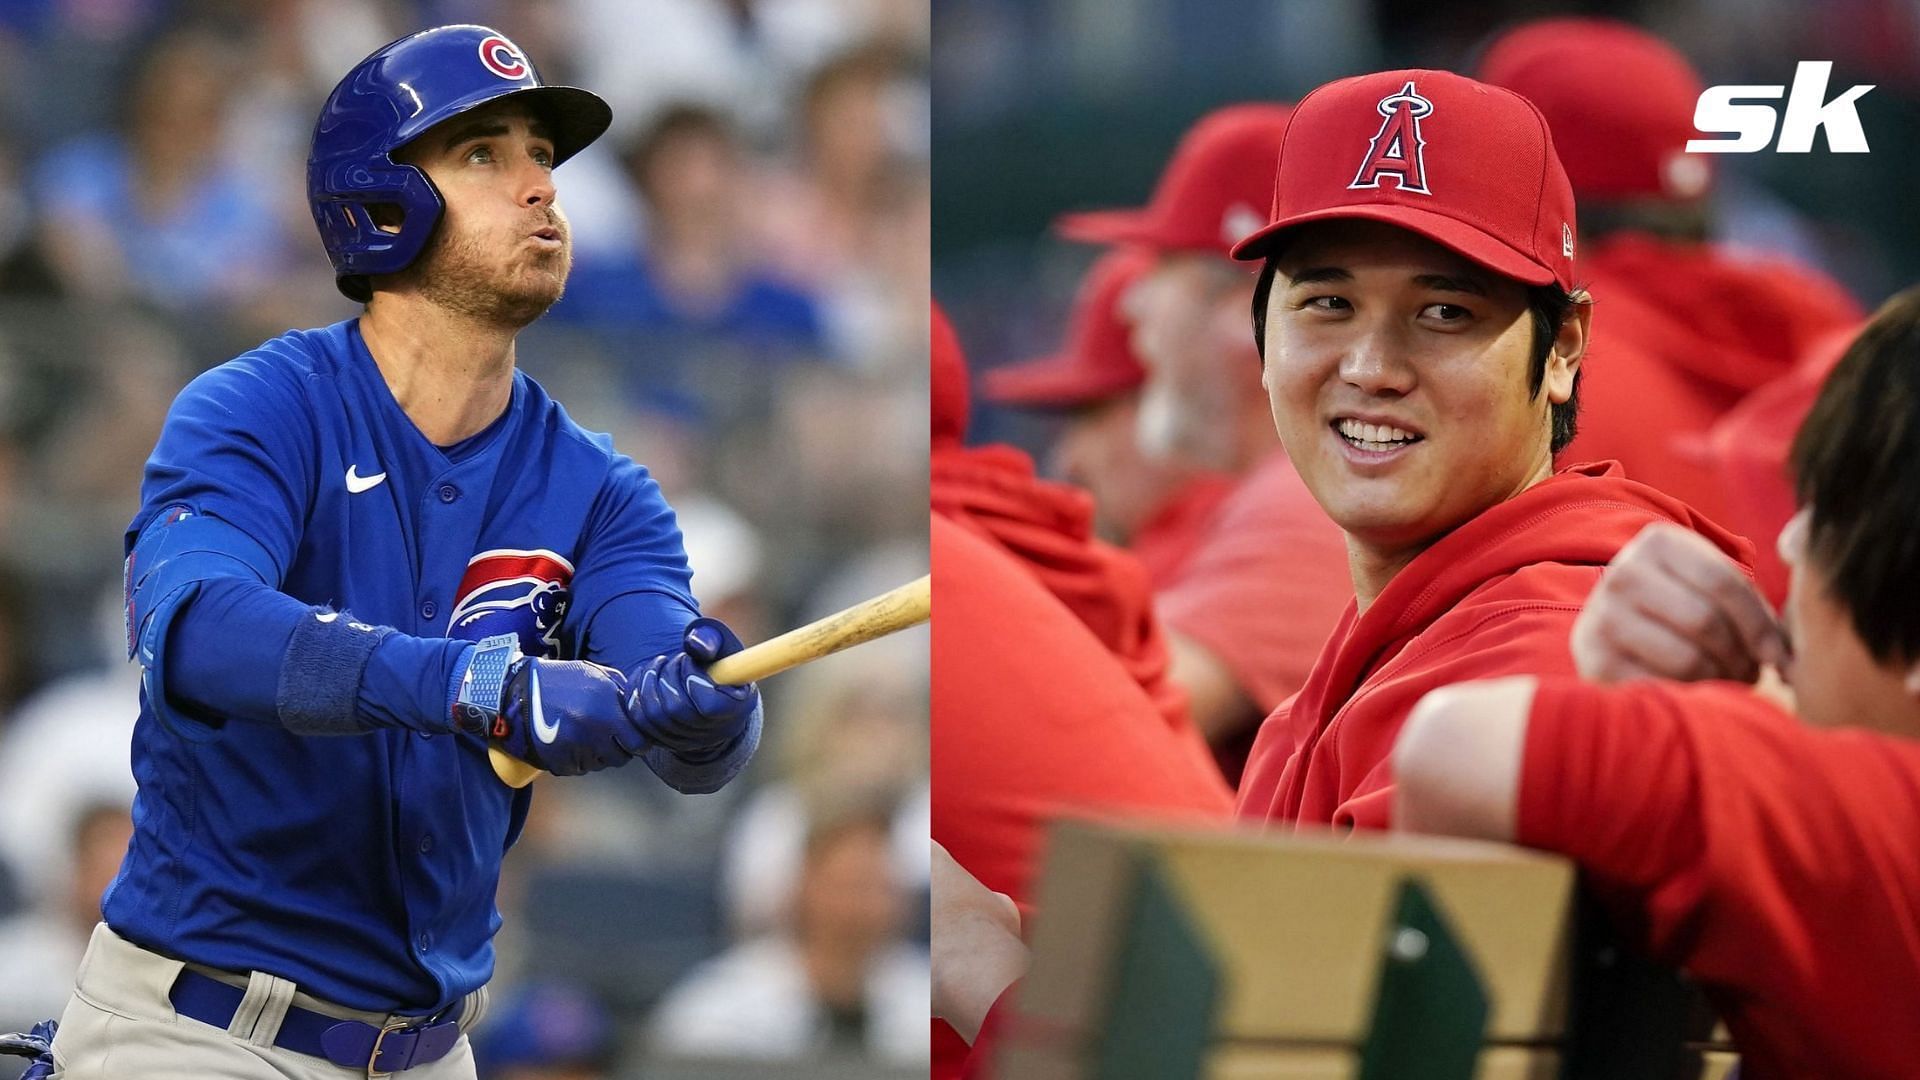 Shohei Ohtani and Cody Bellinger may find themselves with new homes during the MLB Winter Meetings